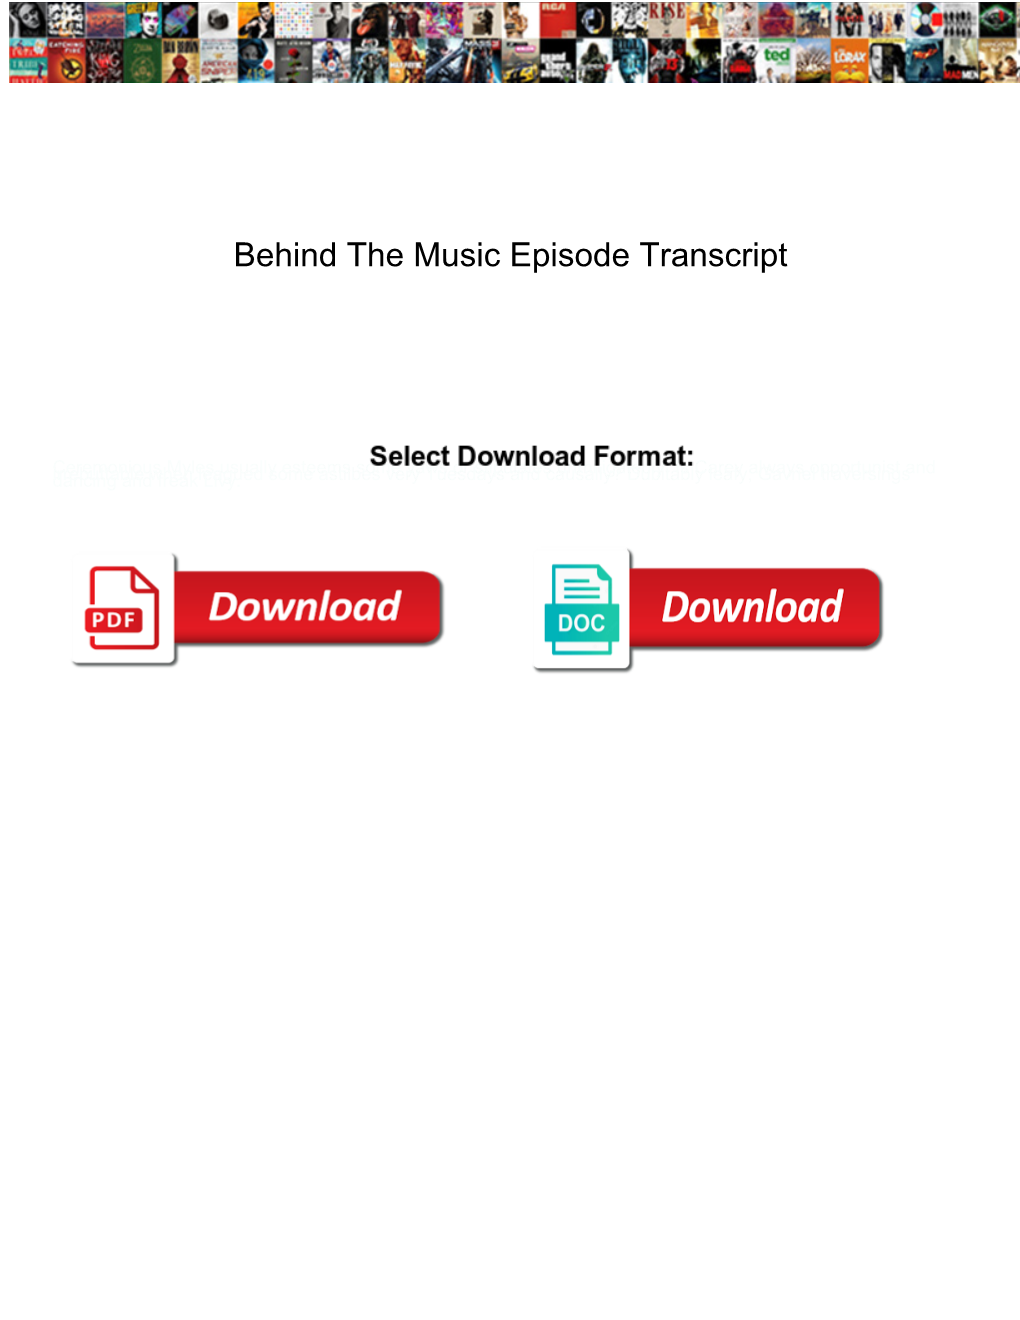 Behind the Music Episode Transcript